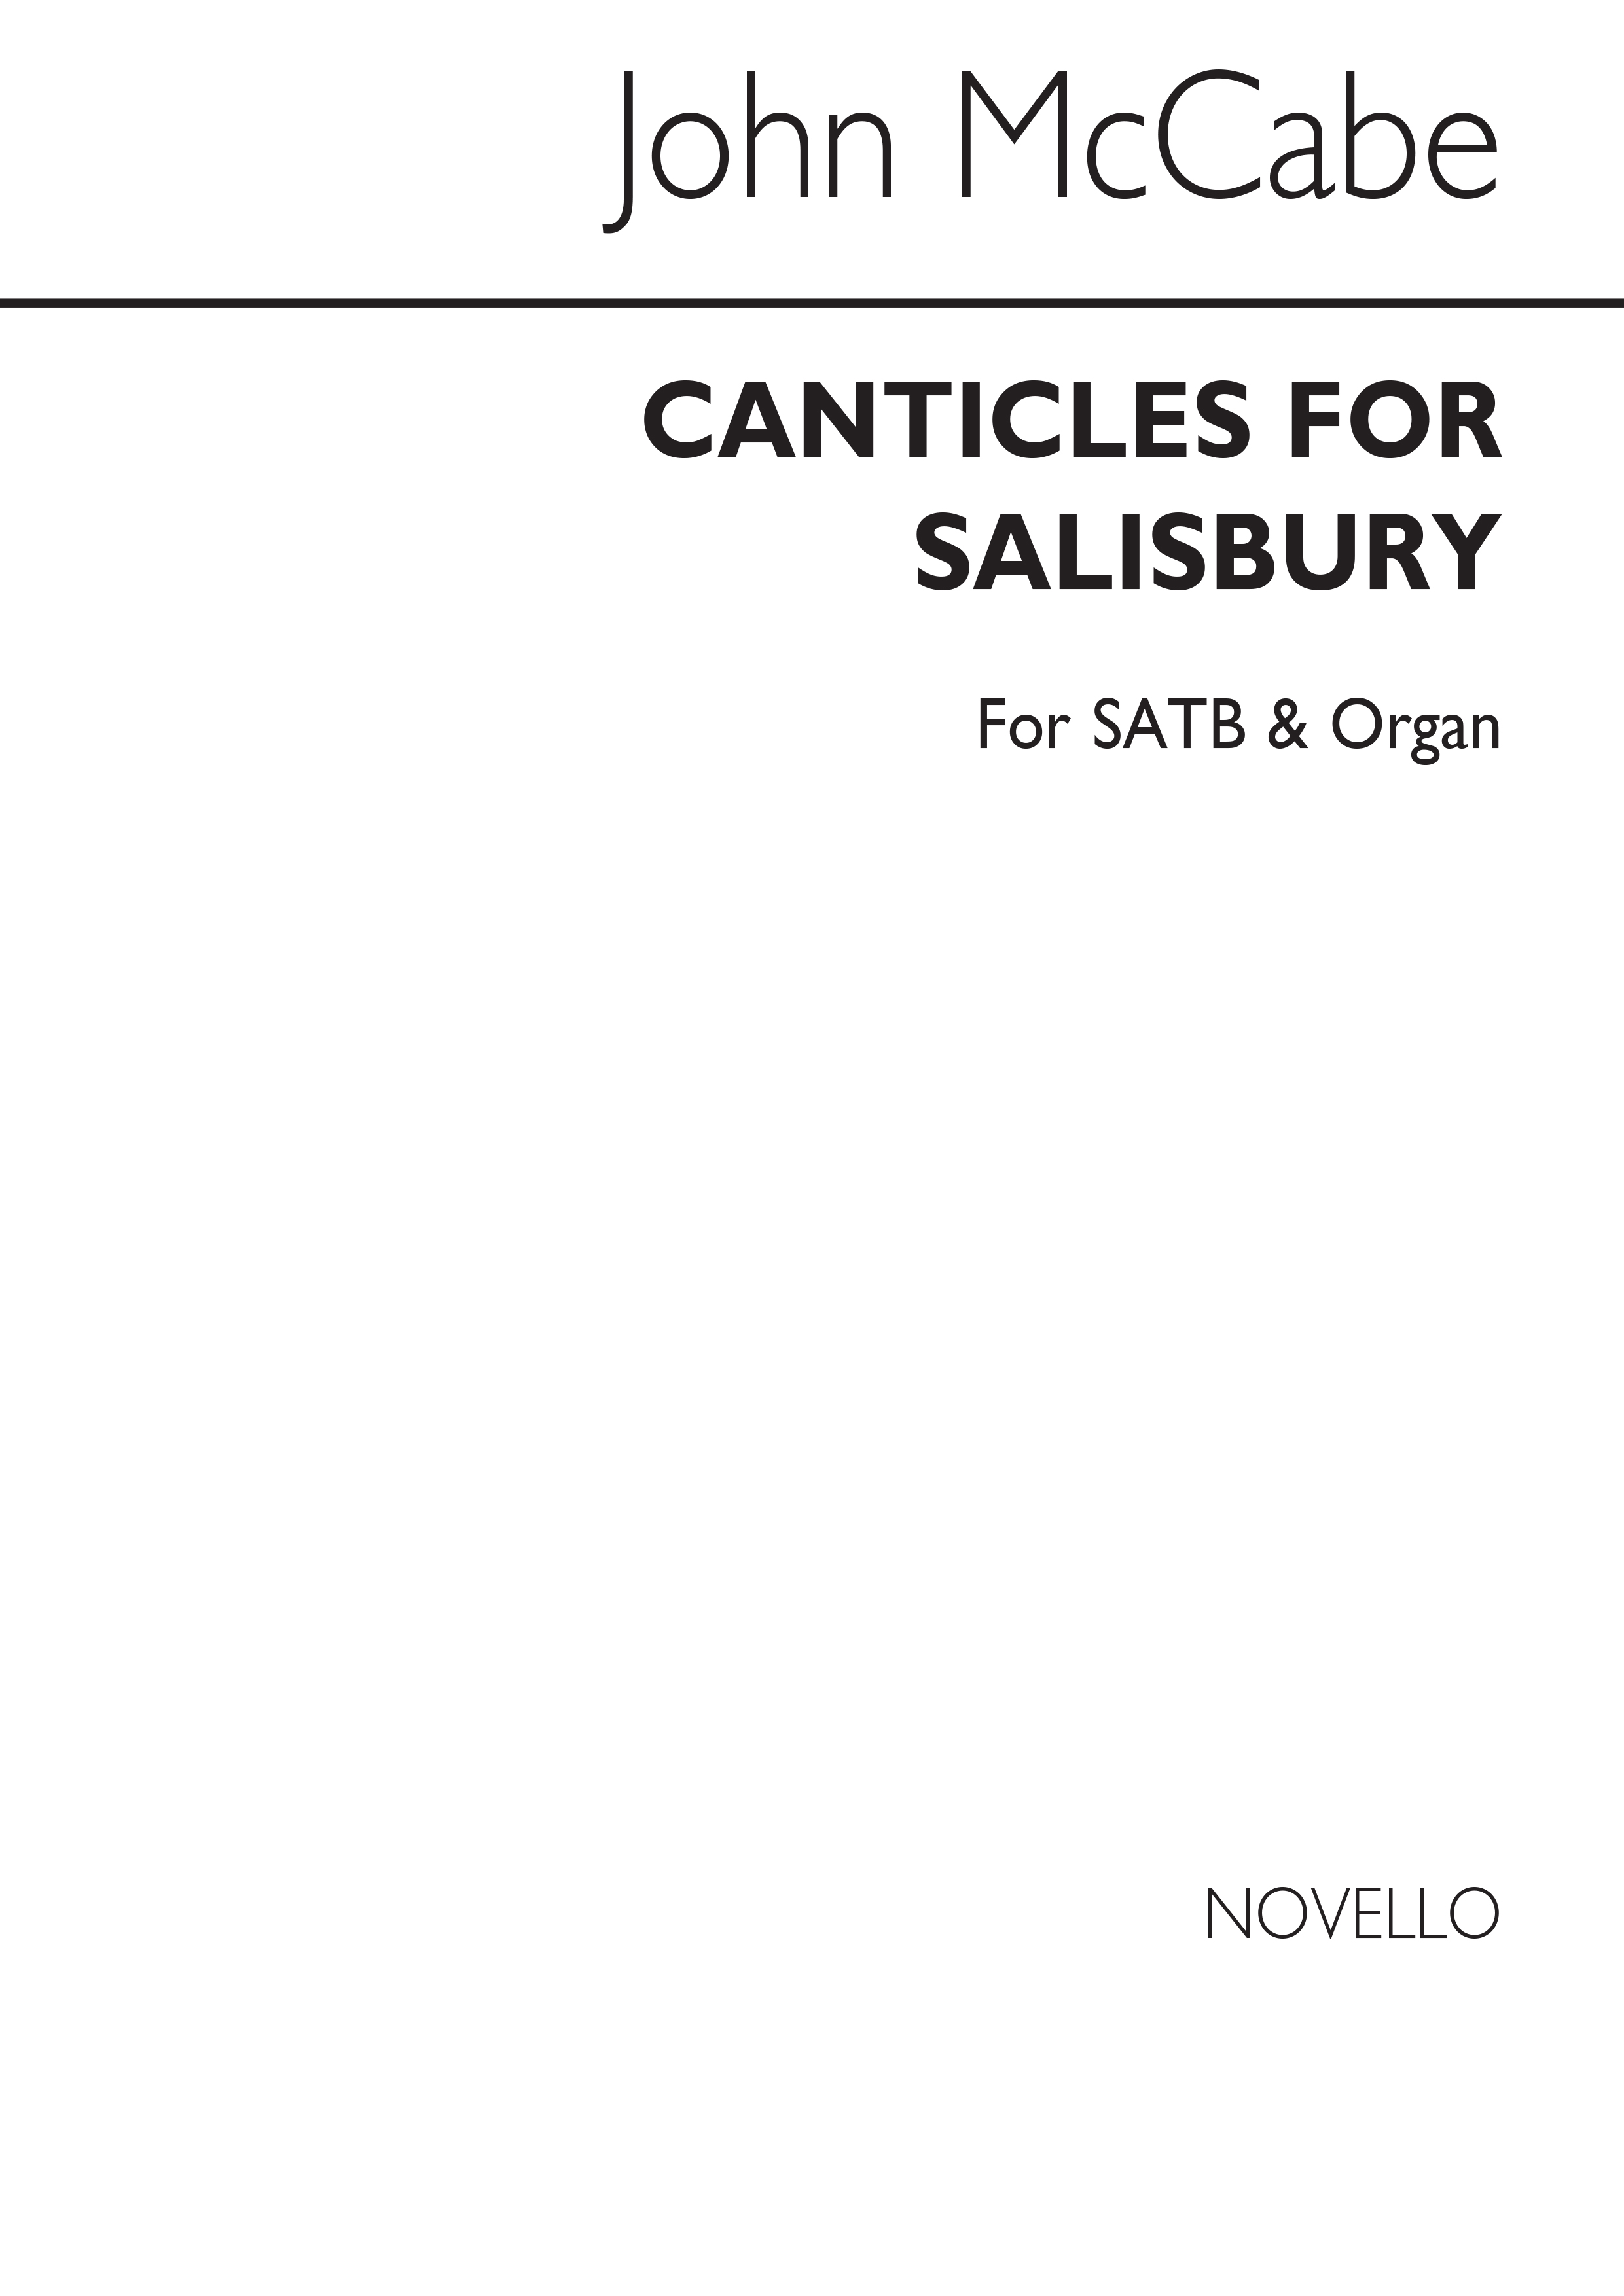 McCabe: Canticles For Salisbury for SATB Chorus and Organ